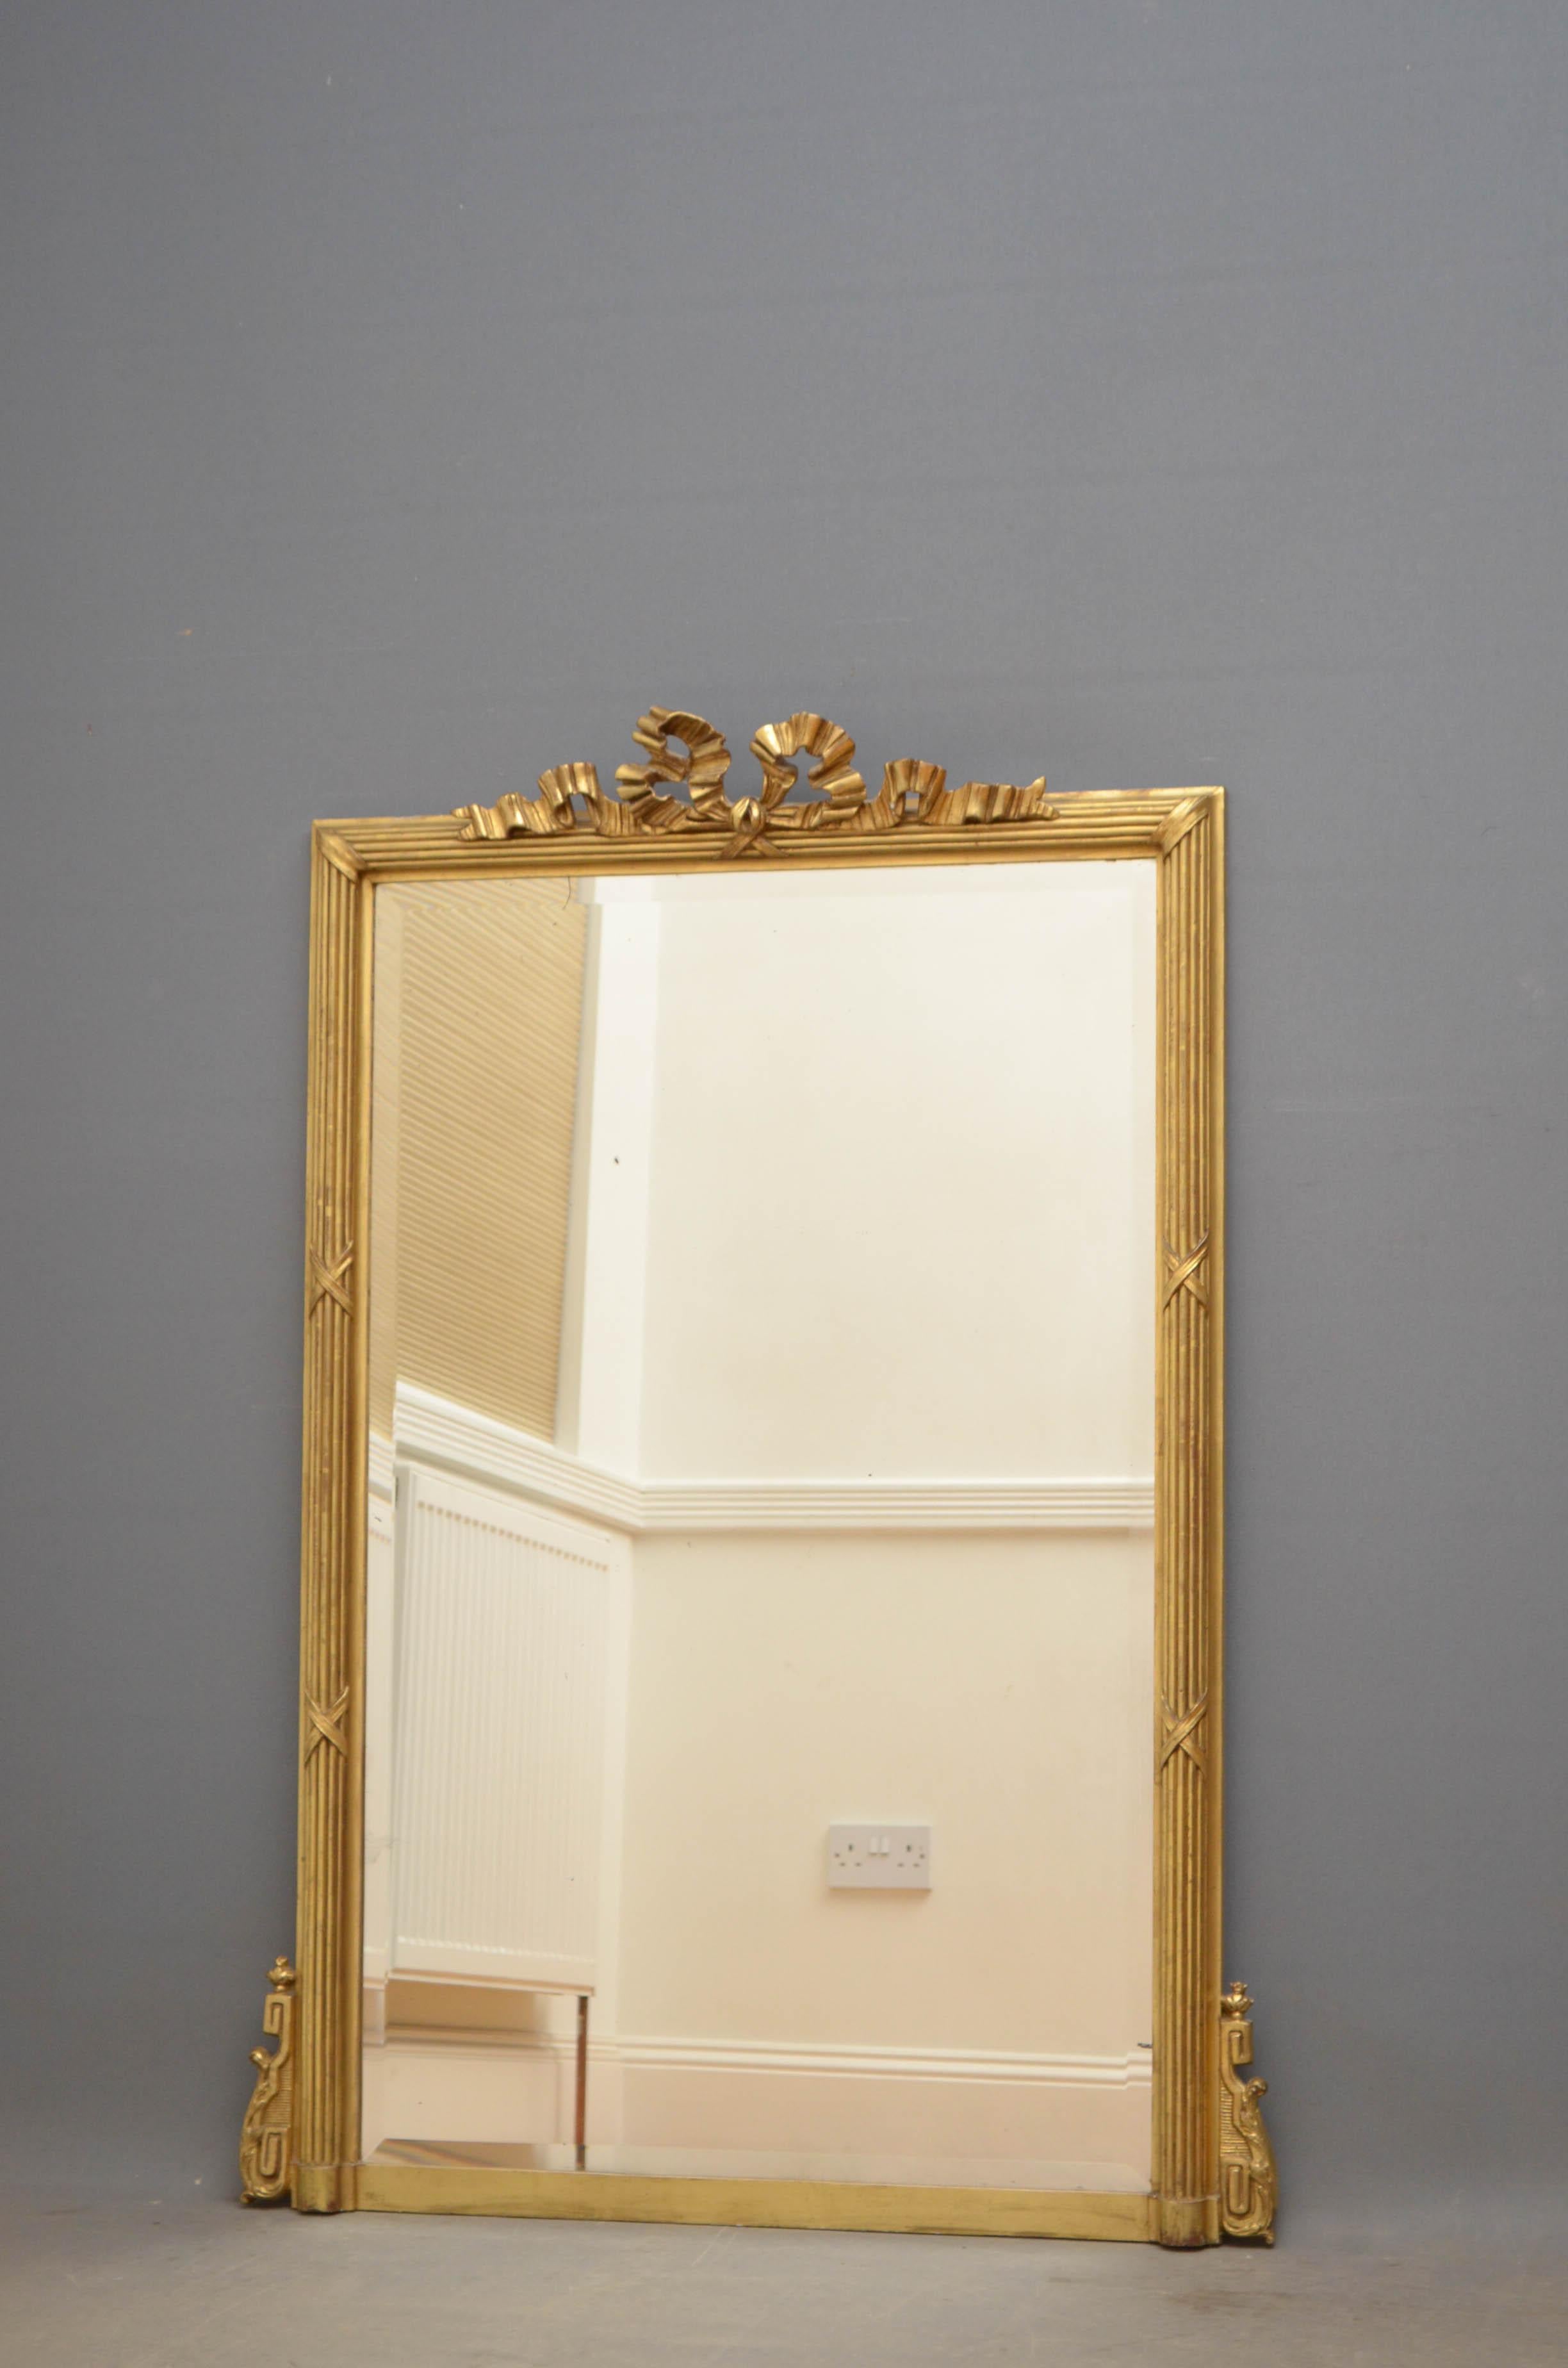 Sn4774, elegant turn of the century French wall mirror, having original bevelled edge glass with some foxing in reeded and bow decorated frame with scrolls to base. This antique mirror is in home ready condition, circa 1900
Measures: H51.5